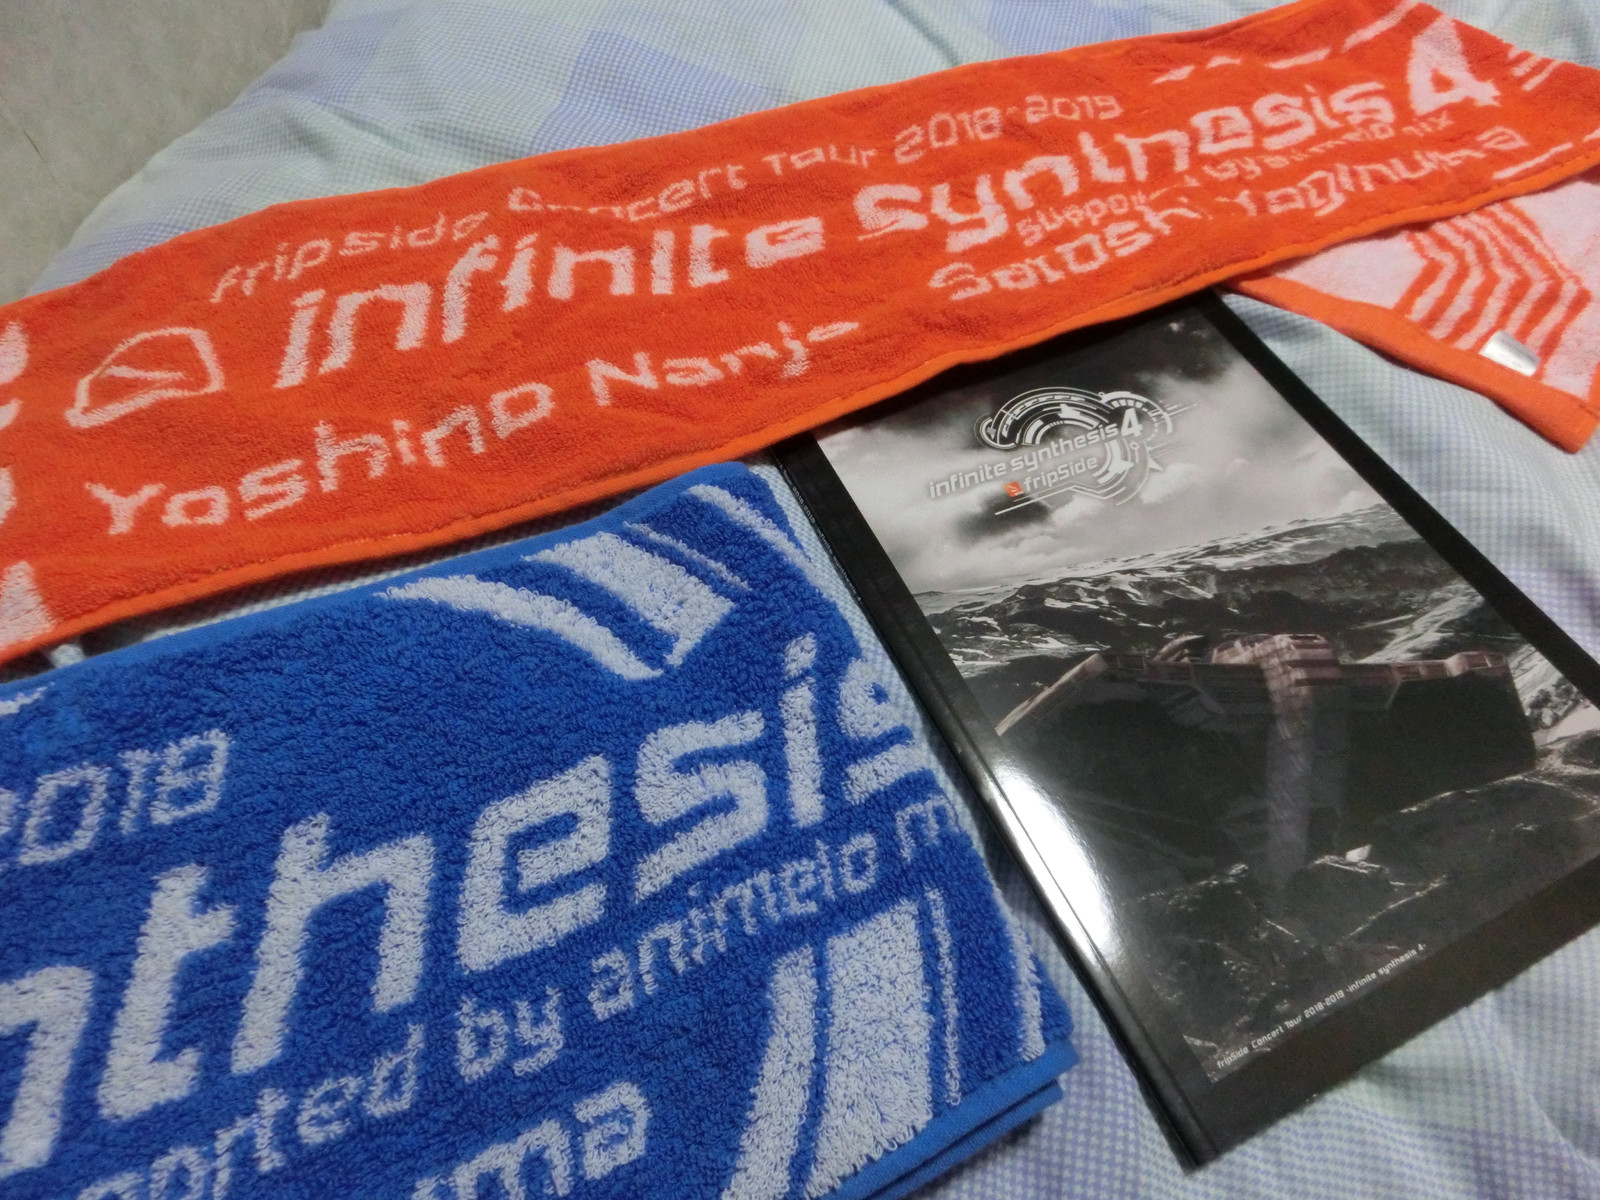 Fripside Concert Tour Infinite Synthesis 4 横浜公演に行ってきた